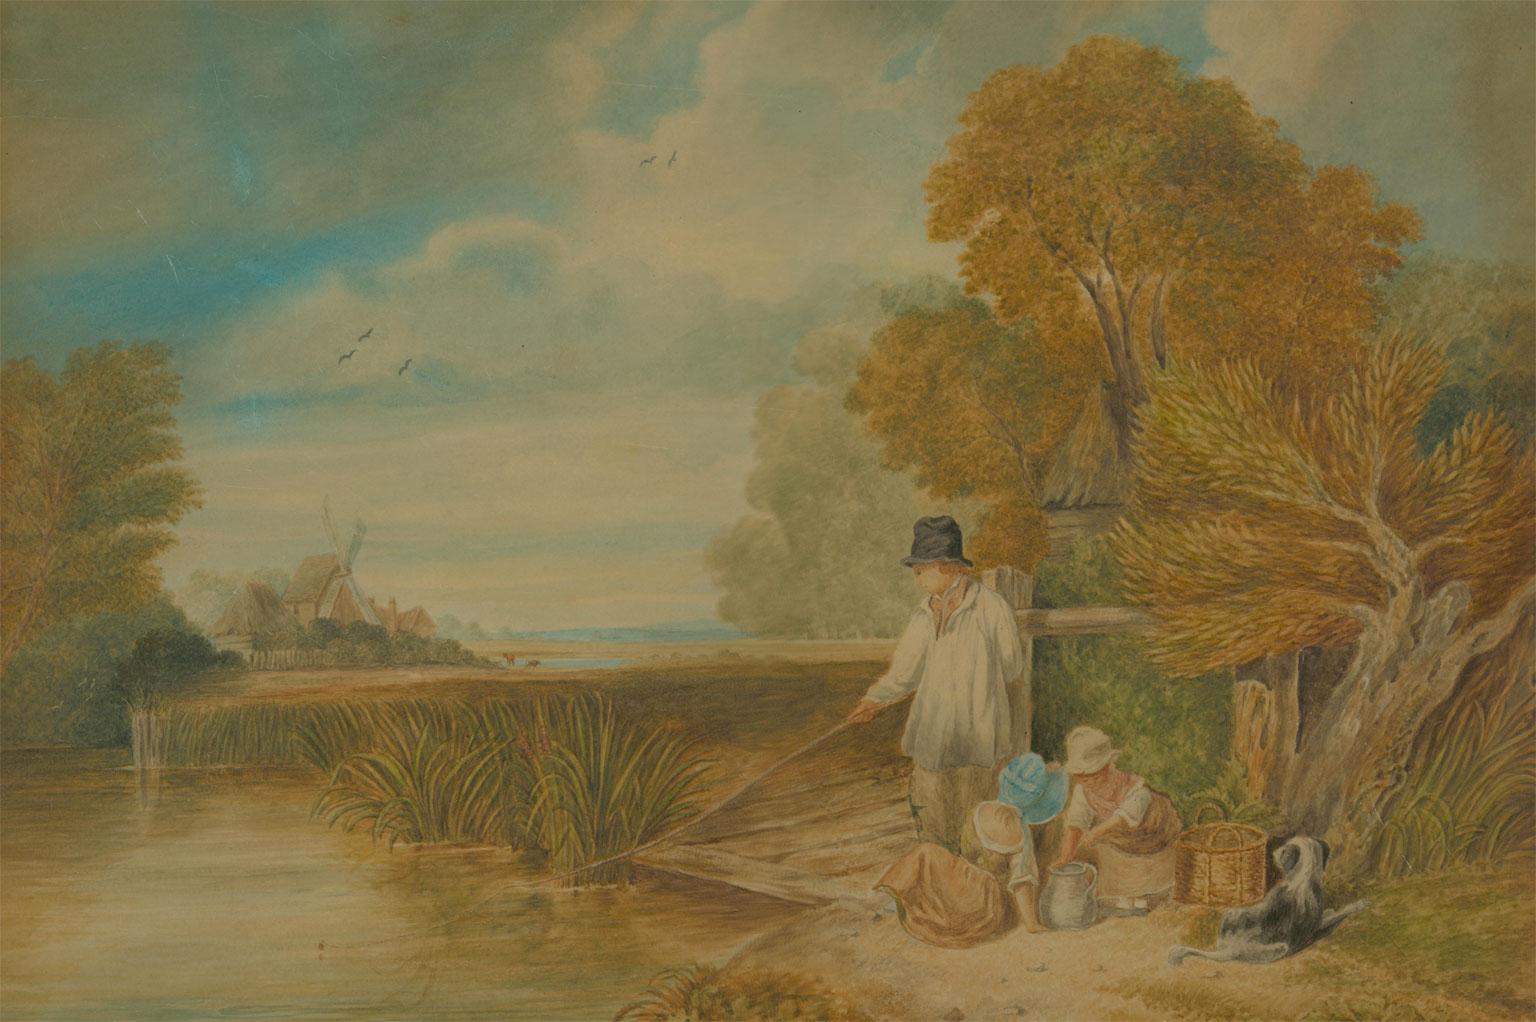 Framed 19th Century Watercolour - Tranquil Fishing in the Countryside - Art by Unknown